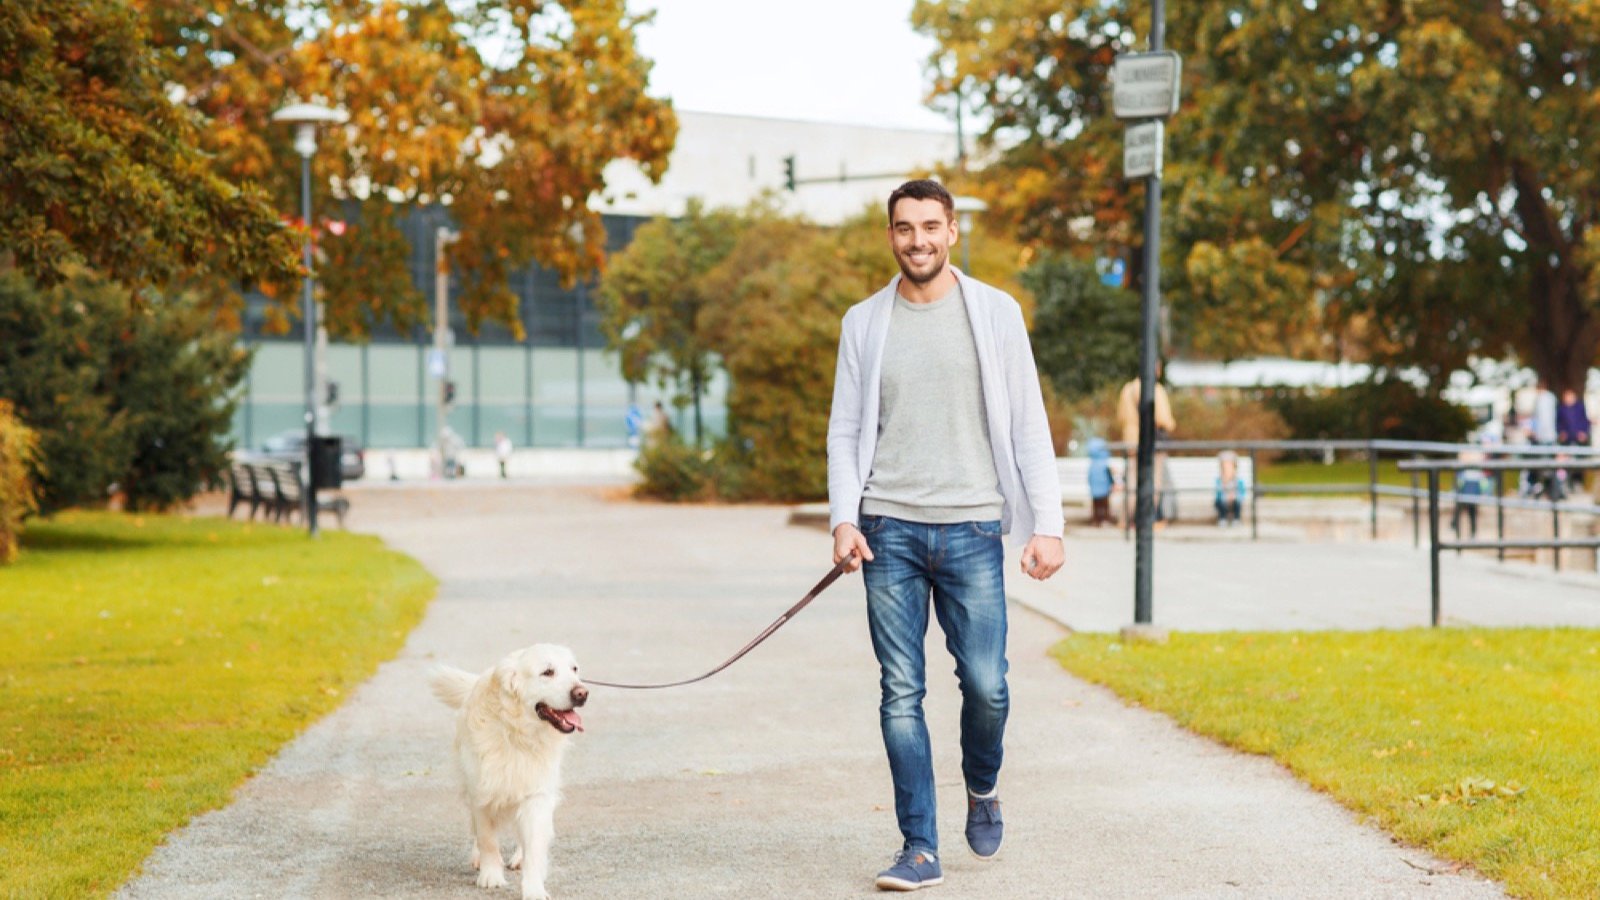 <p>Walking is great therapy and can help alleviate stress in a few minutes. You don’t have to give up long periods of your day. A 30-minute stroll around the block can do much to lift anxiety and low moods.</p>